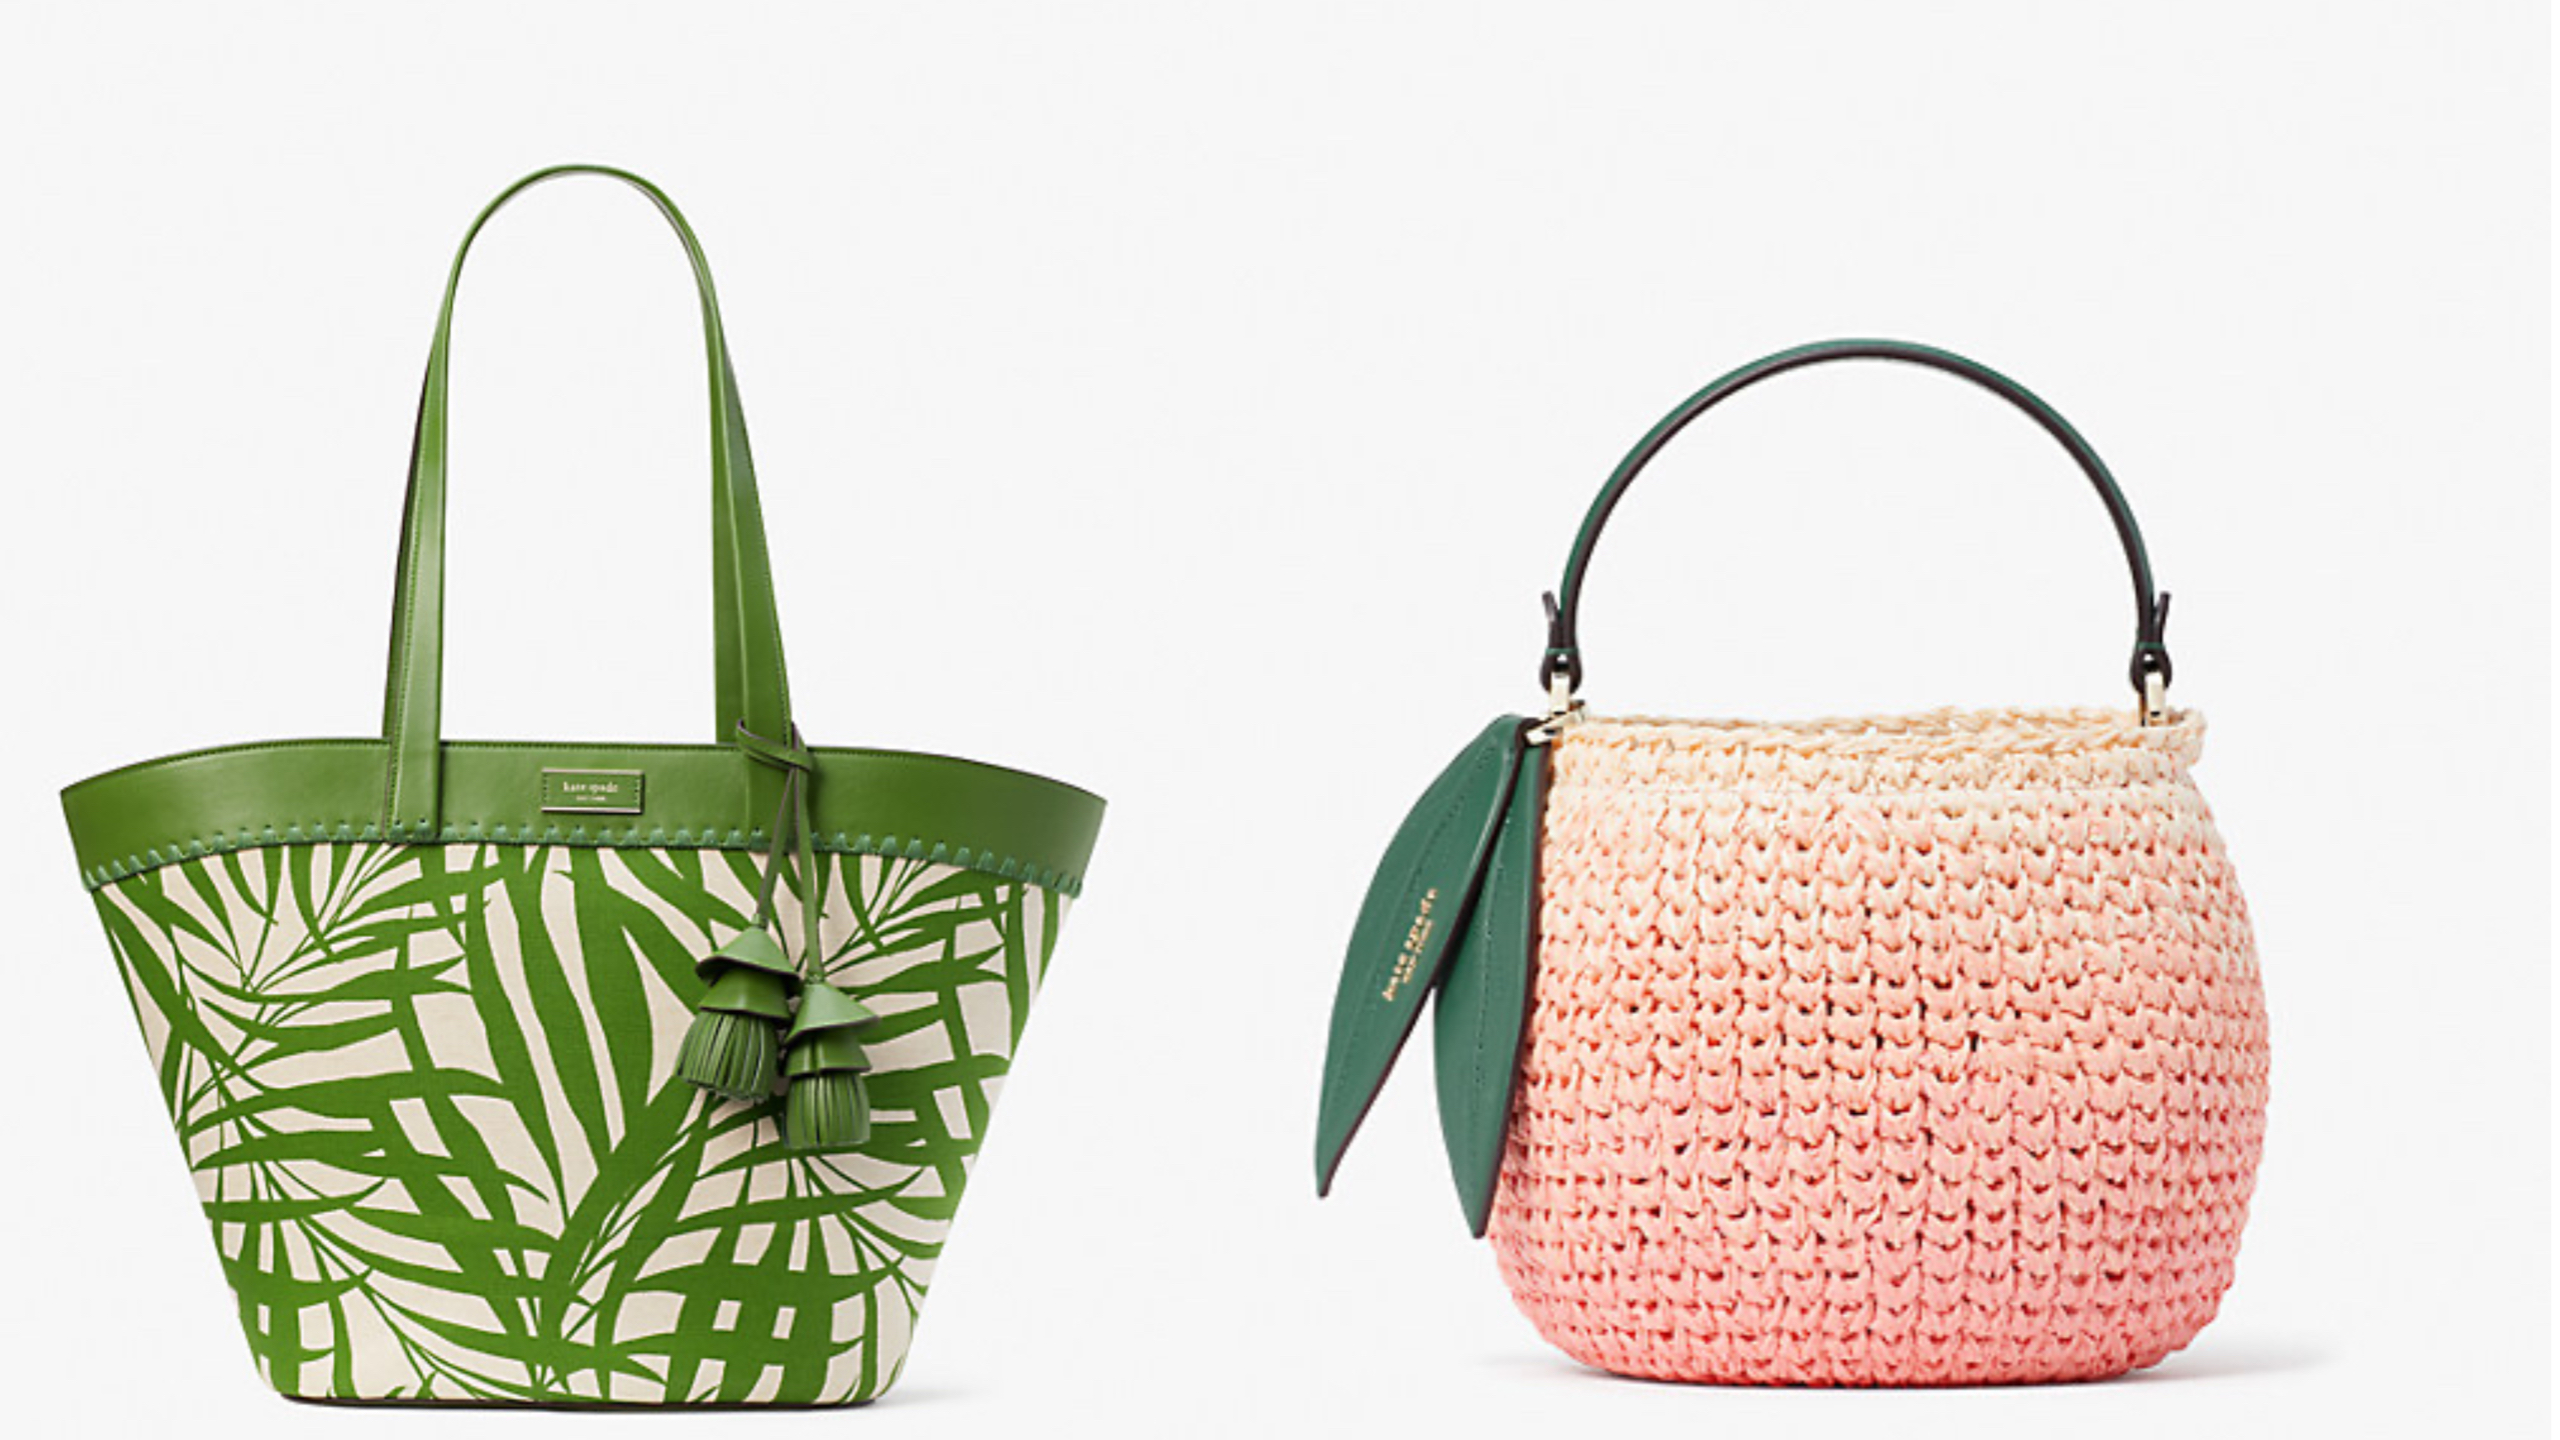 Kate Spade Sale: Get 50 percent off newly added styles 